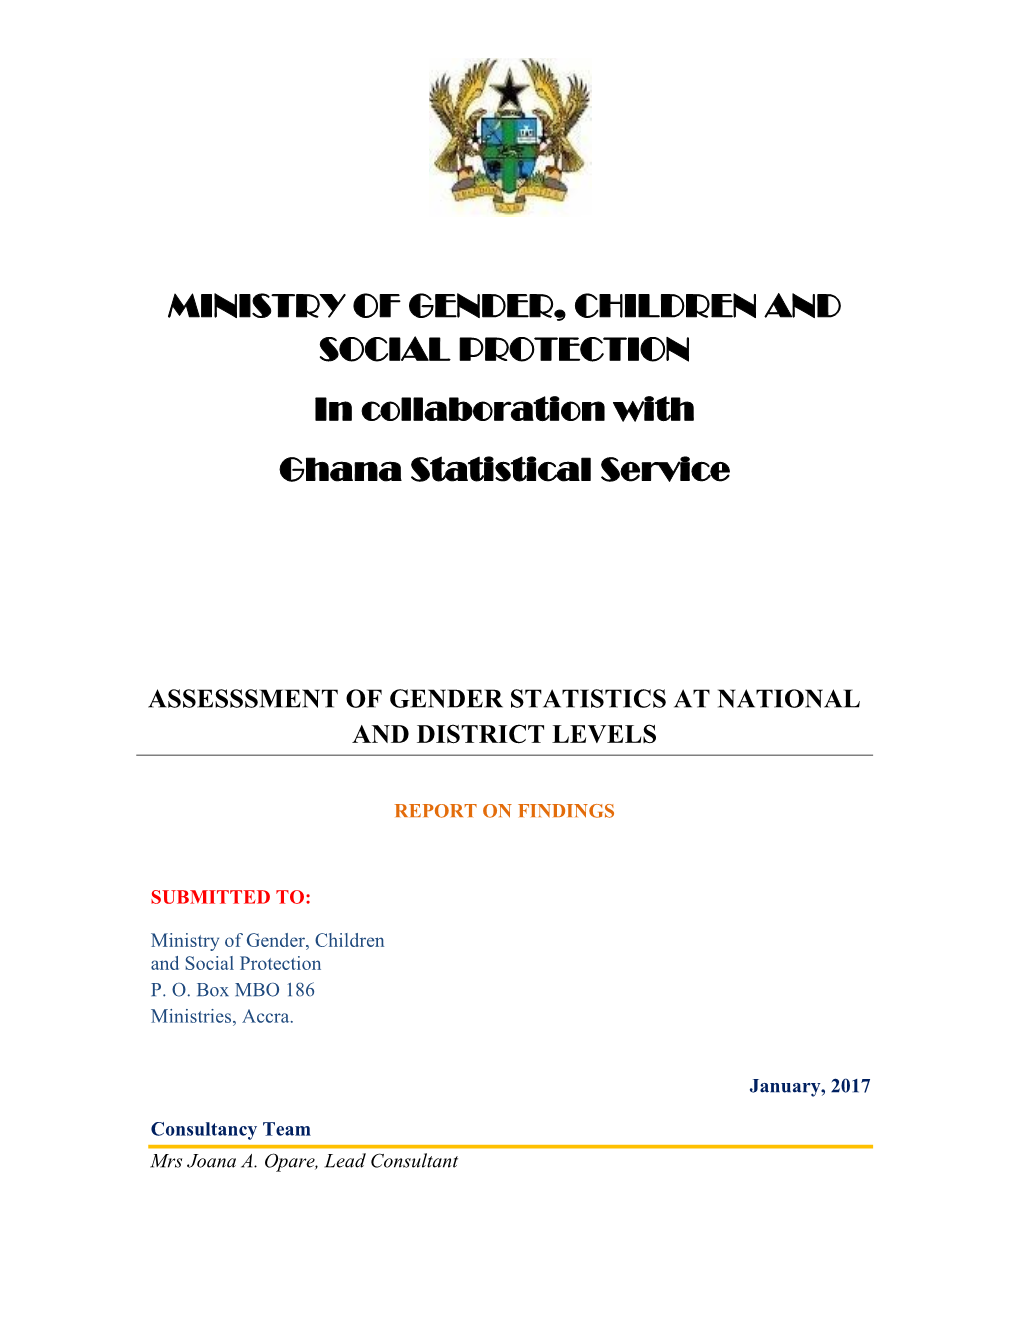 MINISTRY of GENDER, CHILDREN and SOCIAL PROTECTION in Collaboration with Ghana Statistical Service